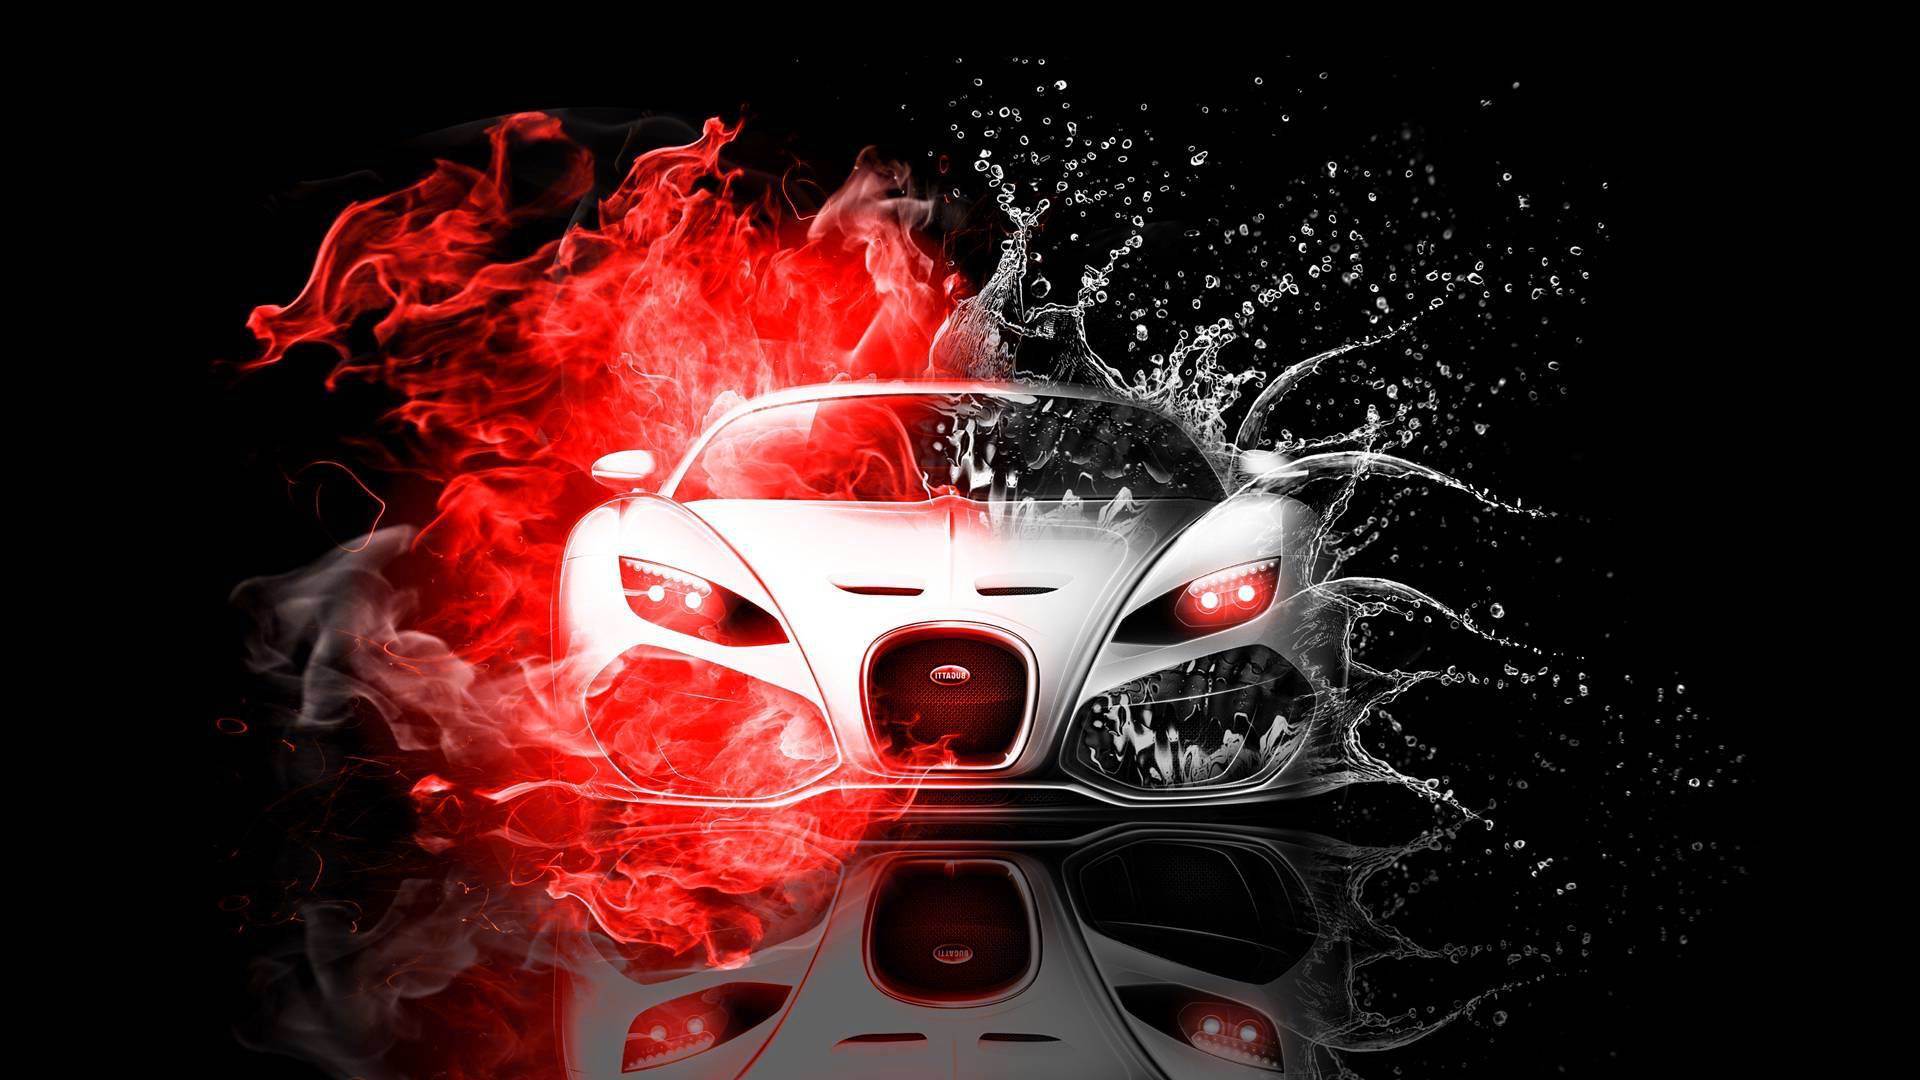 Wallpaper Black And Red Hd Black And Red Hd Wallpapers Bugatti Car 3d Wallpaper Download 1920x1080 Wallpaper Teahub Io